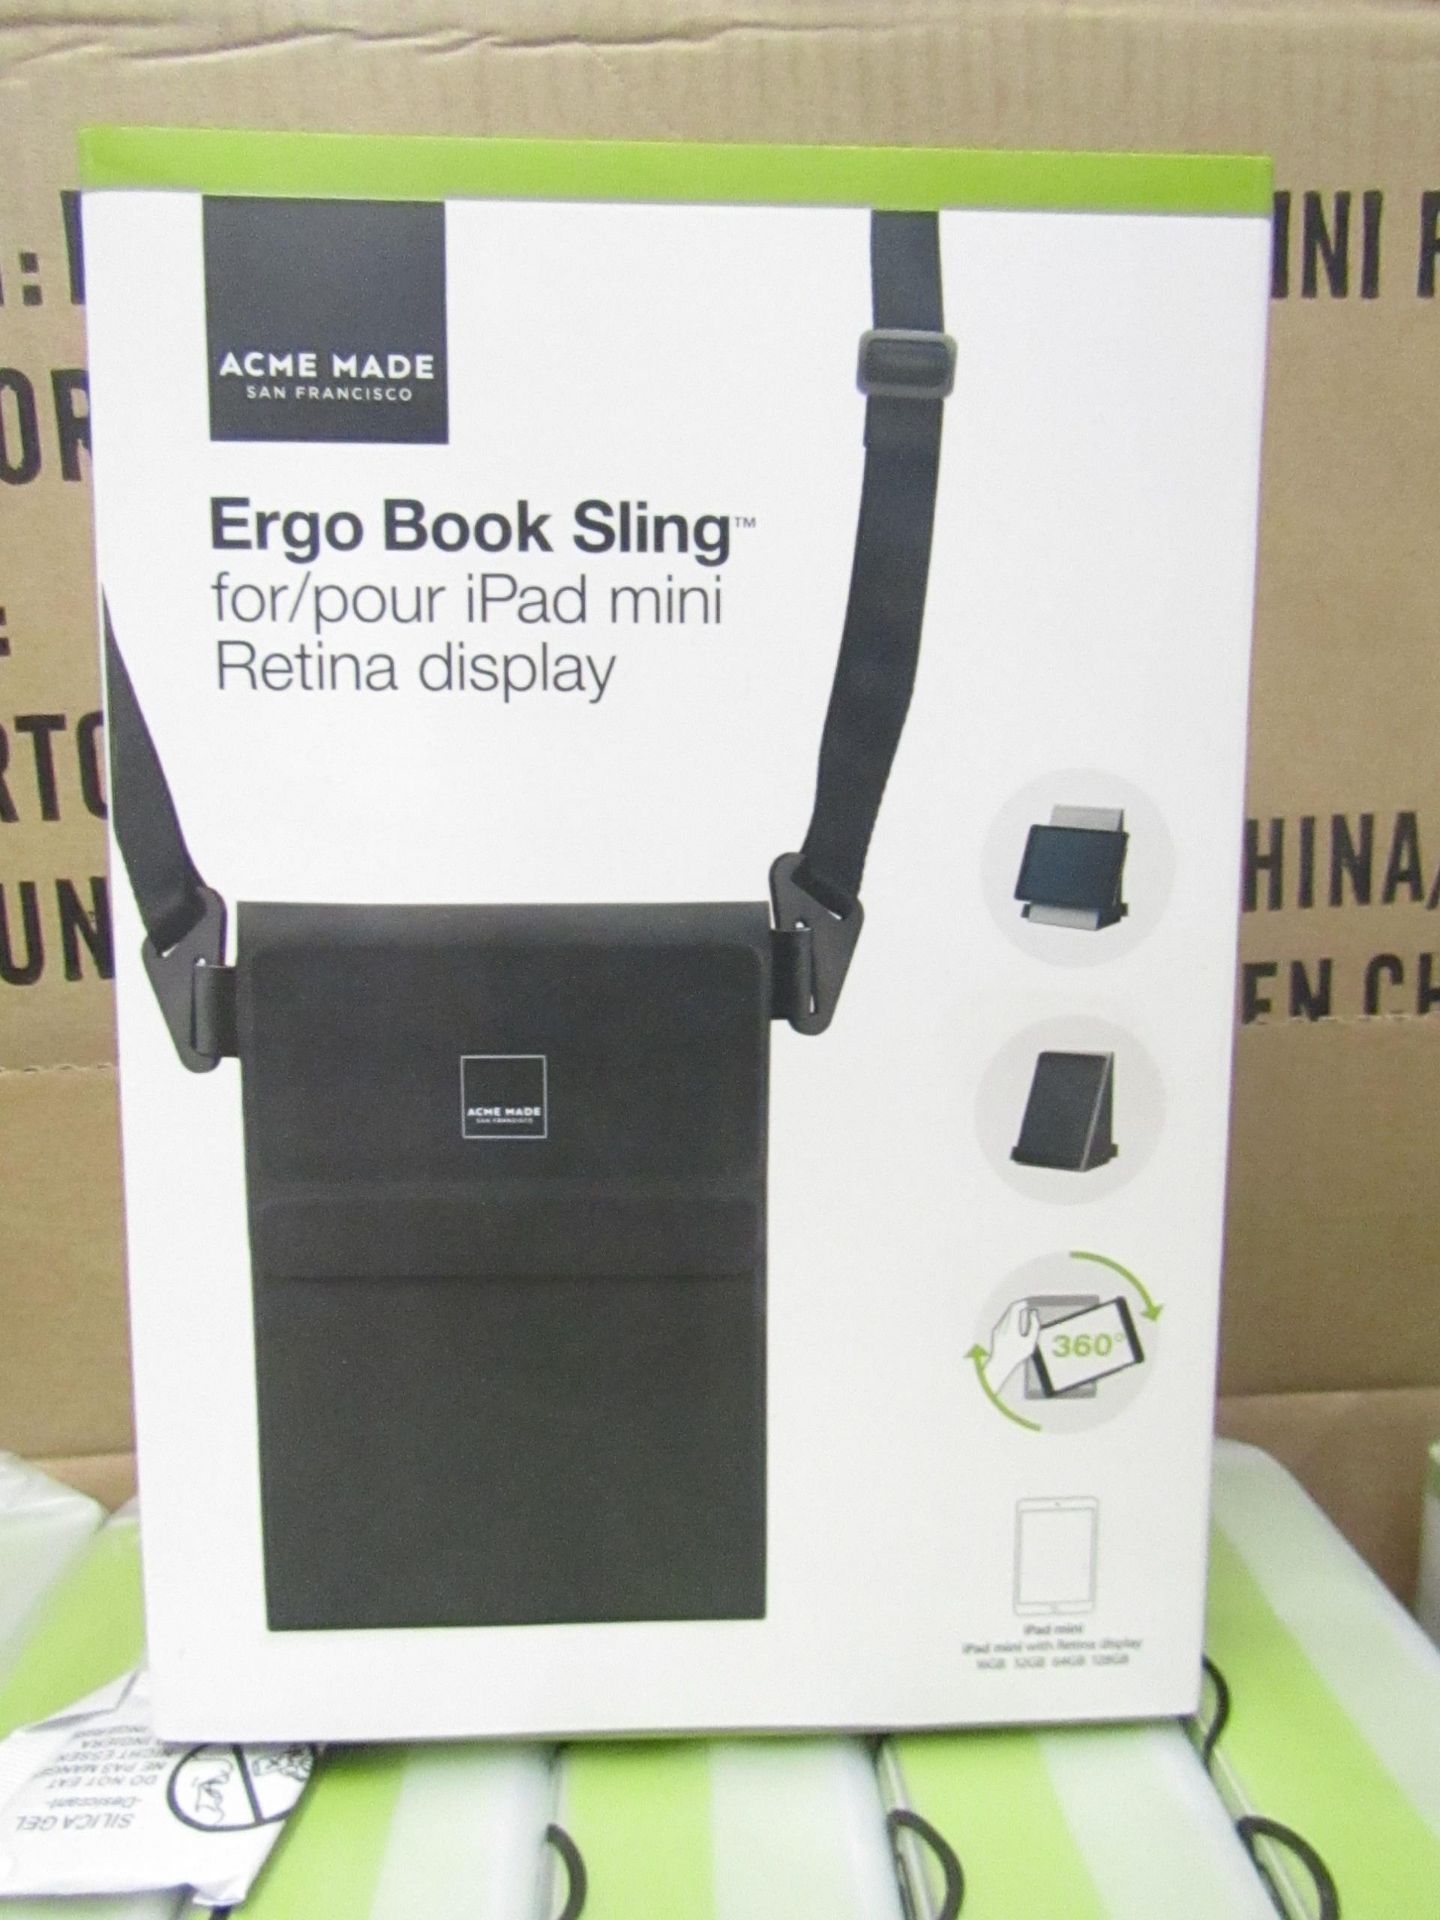 10 x Acme Made Ergo Book Sling Cases for iPad Mini, new